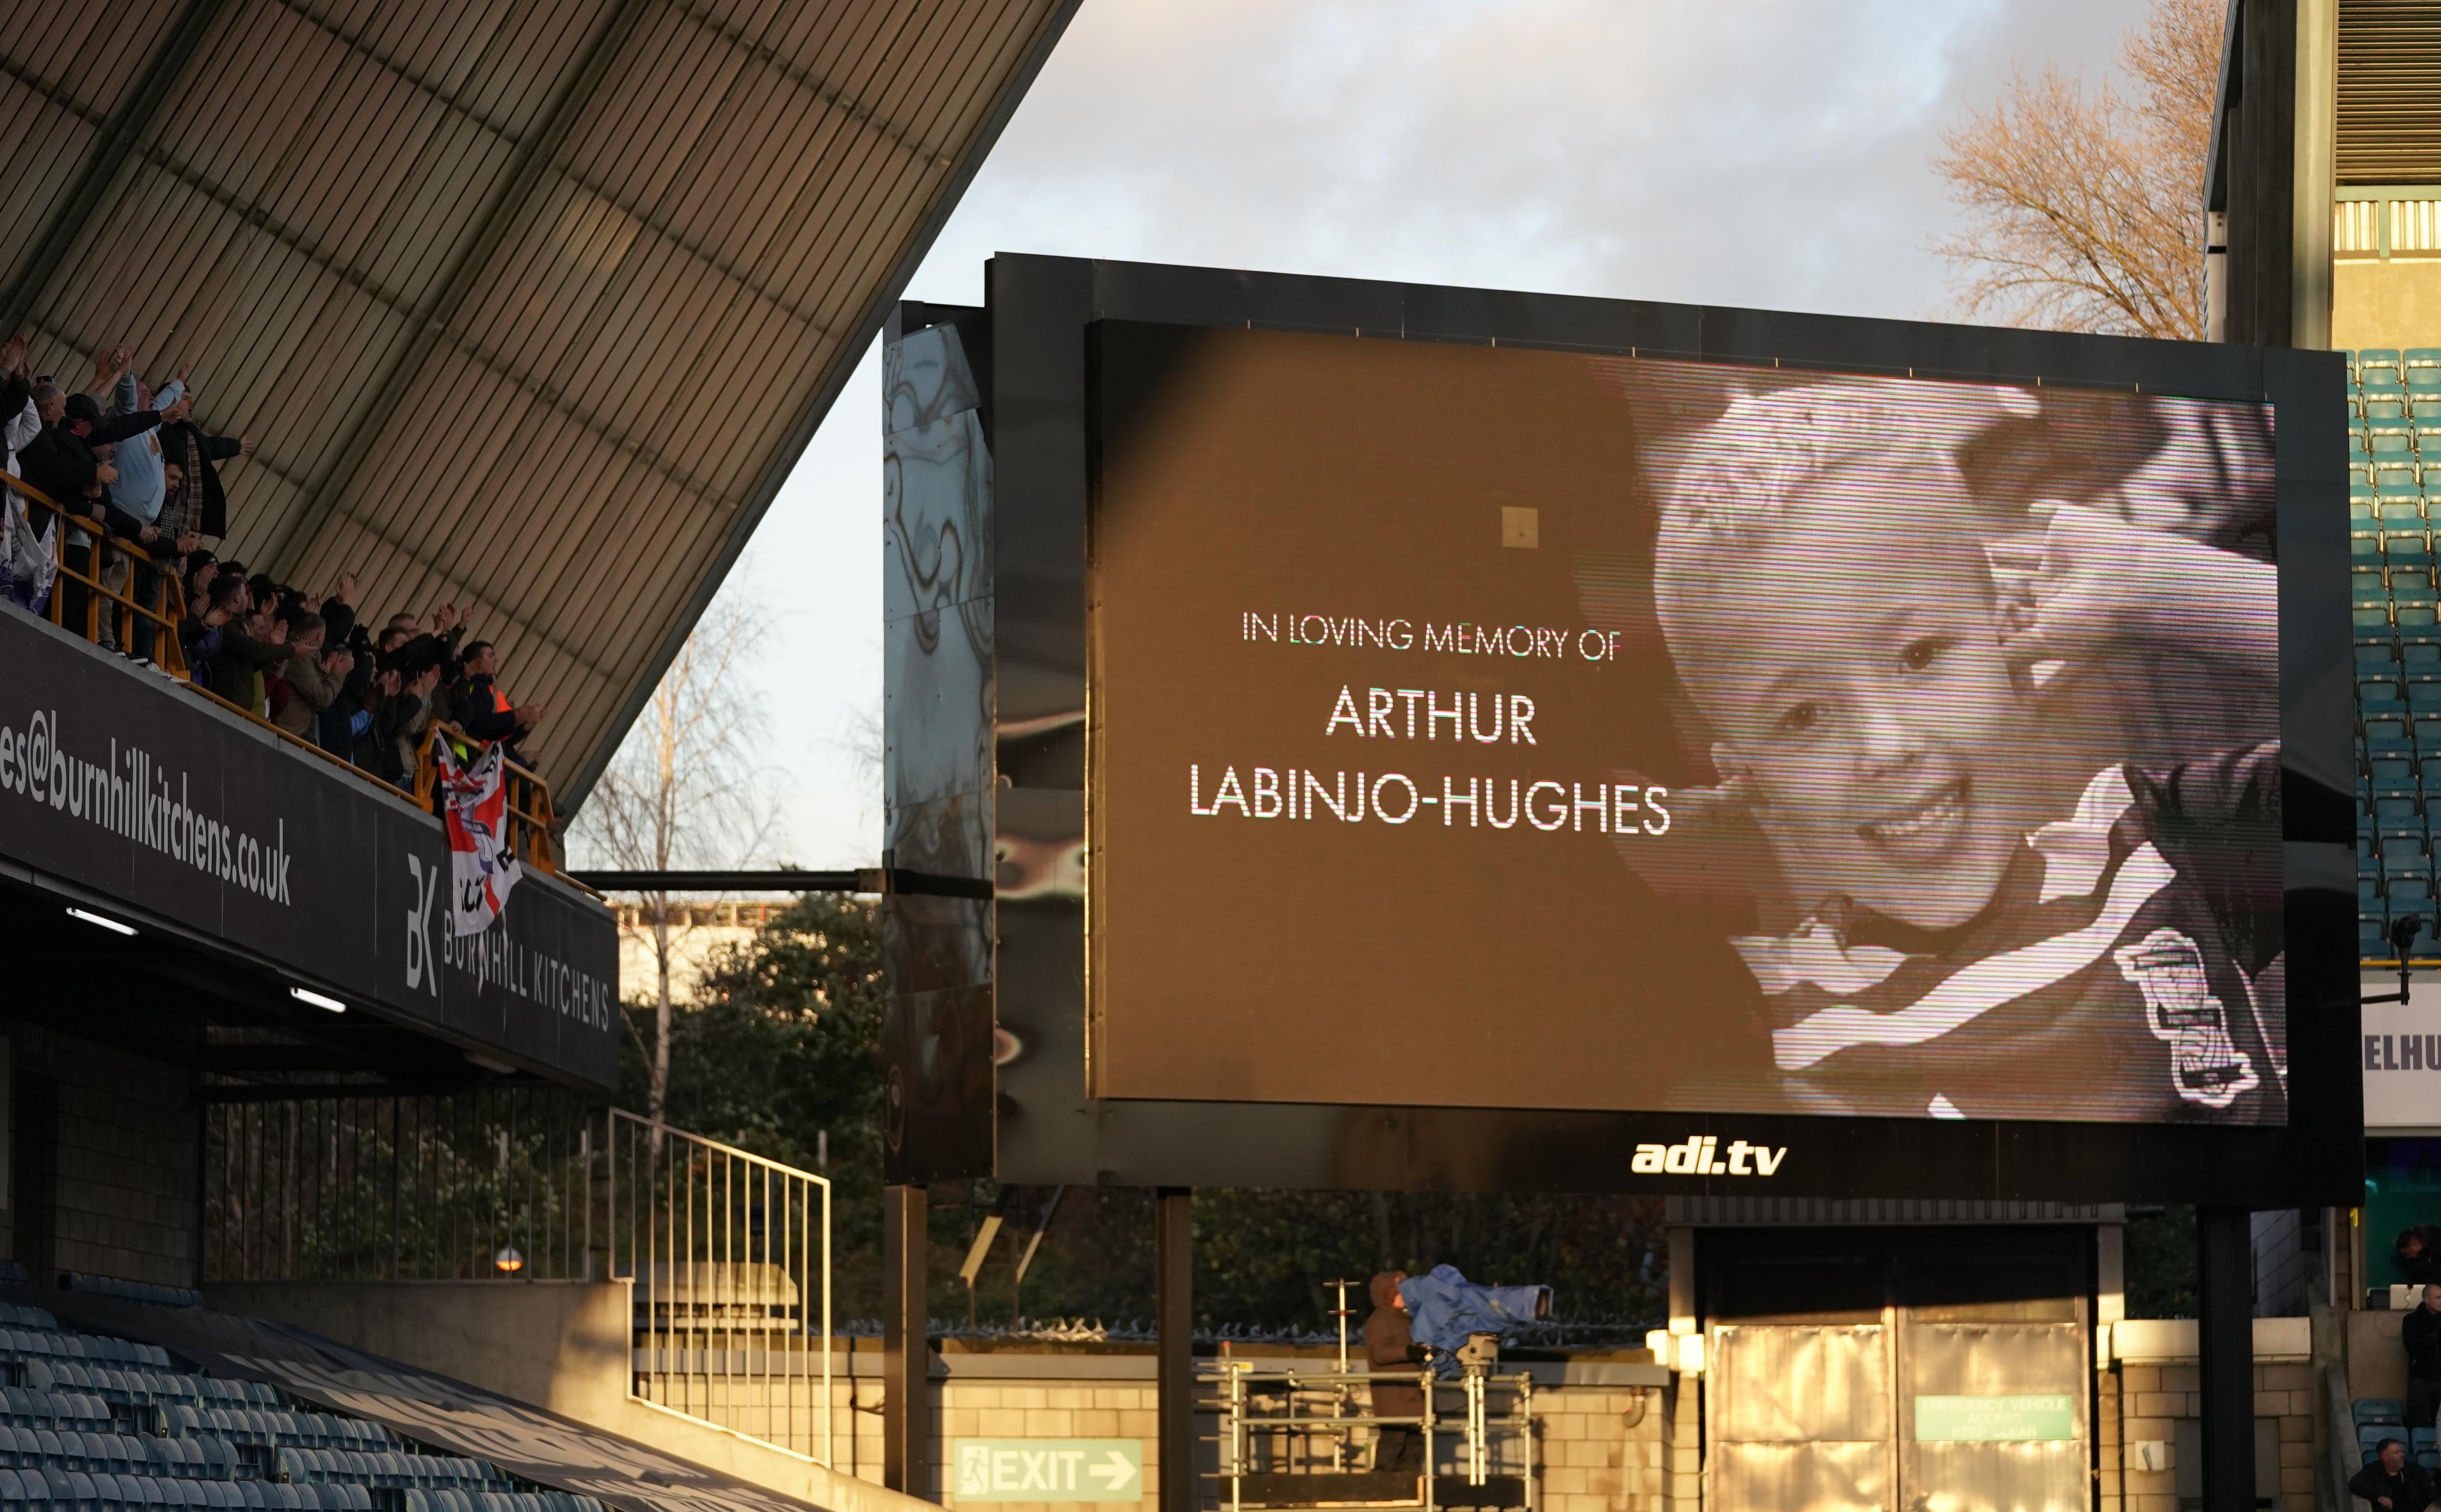 A memorial for Arthur Labinjo-Hughes is shown on the big screen before the Sky Bet Championship match at The Den, London (PA)